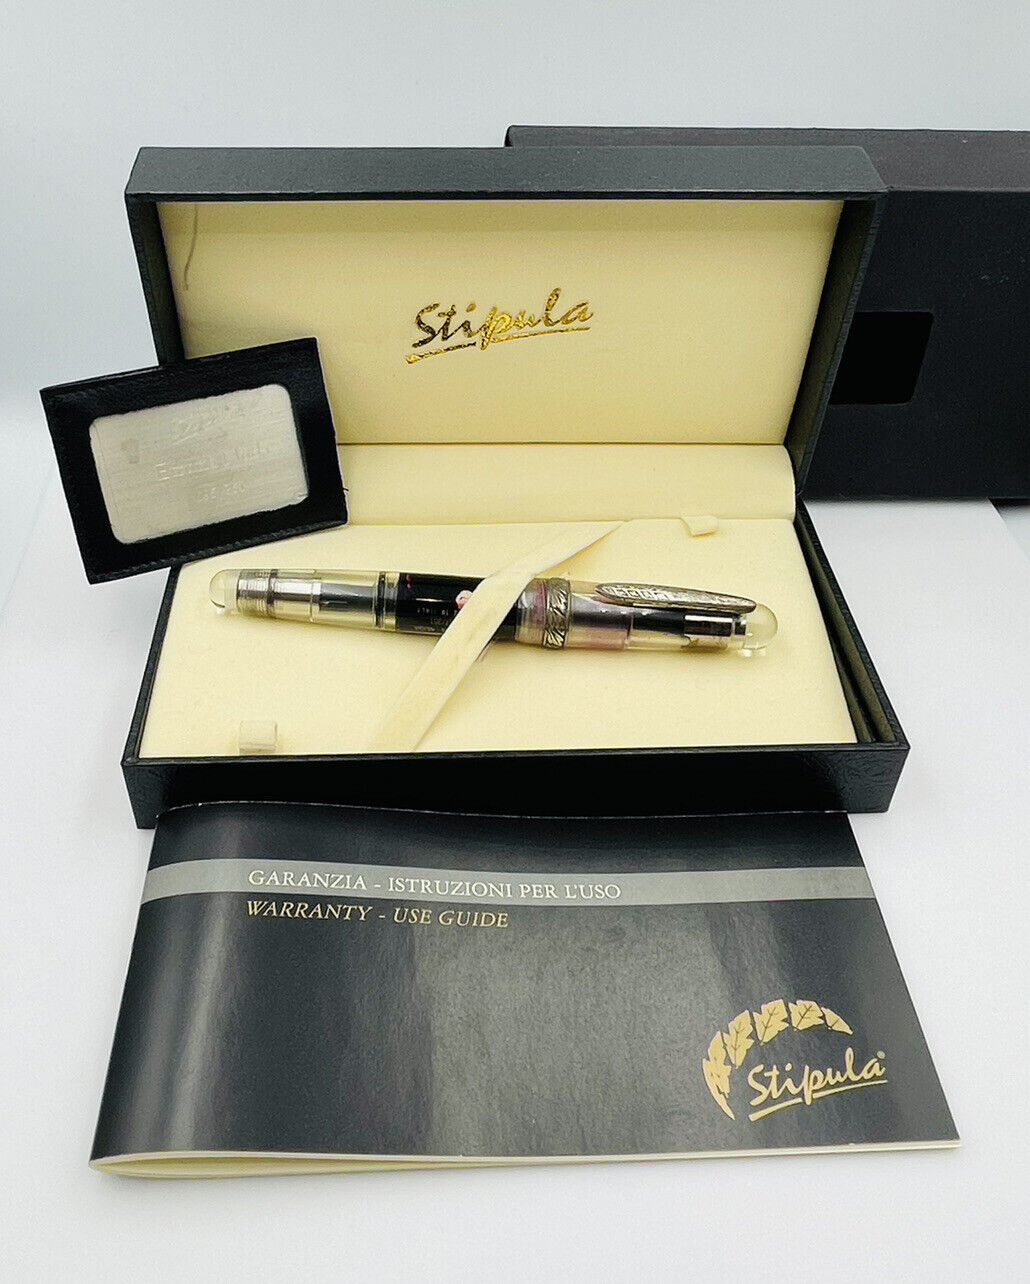 Stipula Etruria Nuda Sterling Silver & Clear Resin Limited Edition Fountain Pen